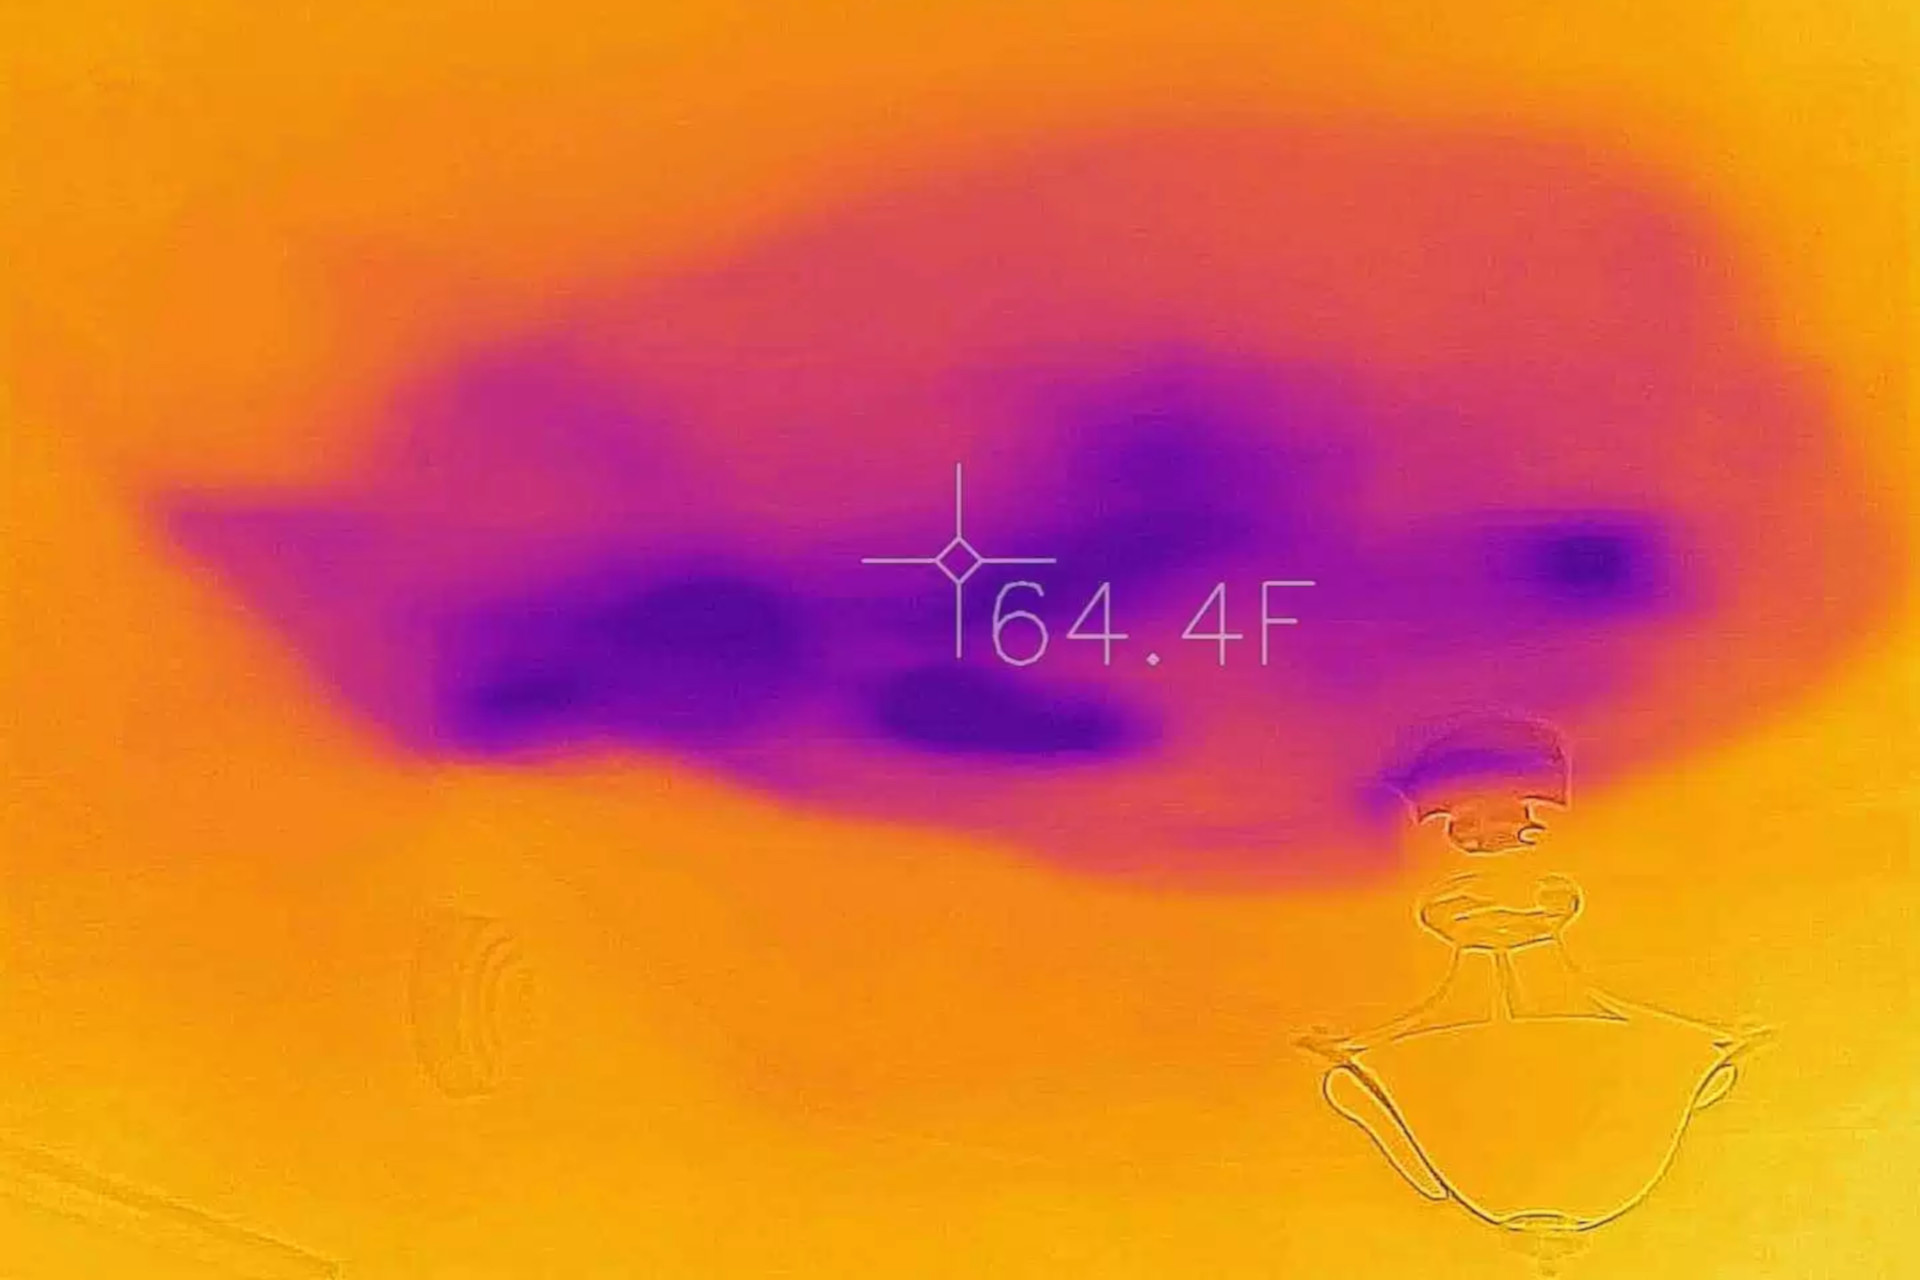 Mould detection via thermal imaging